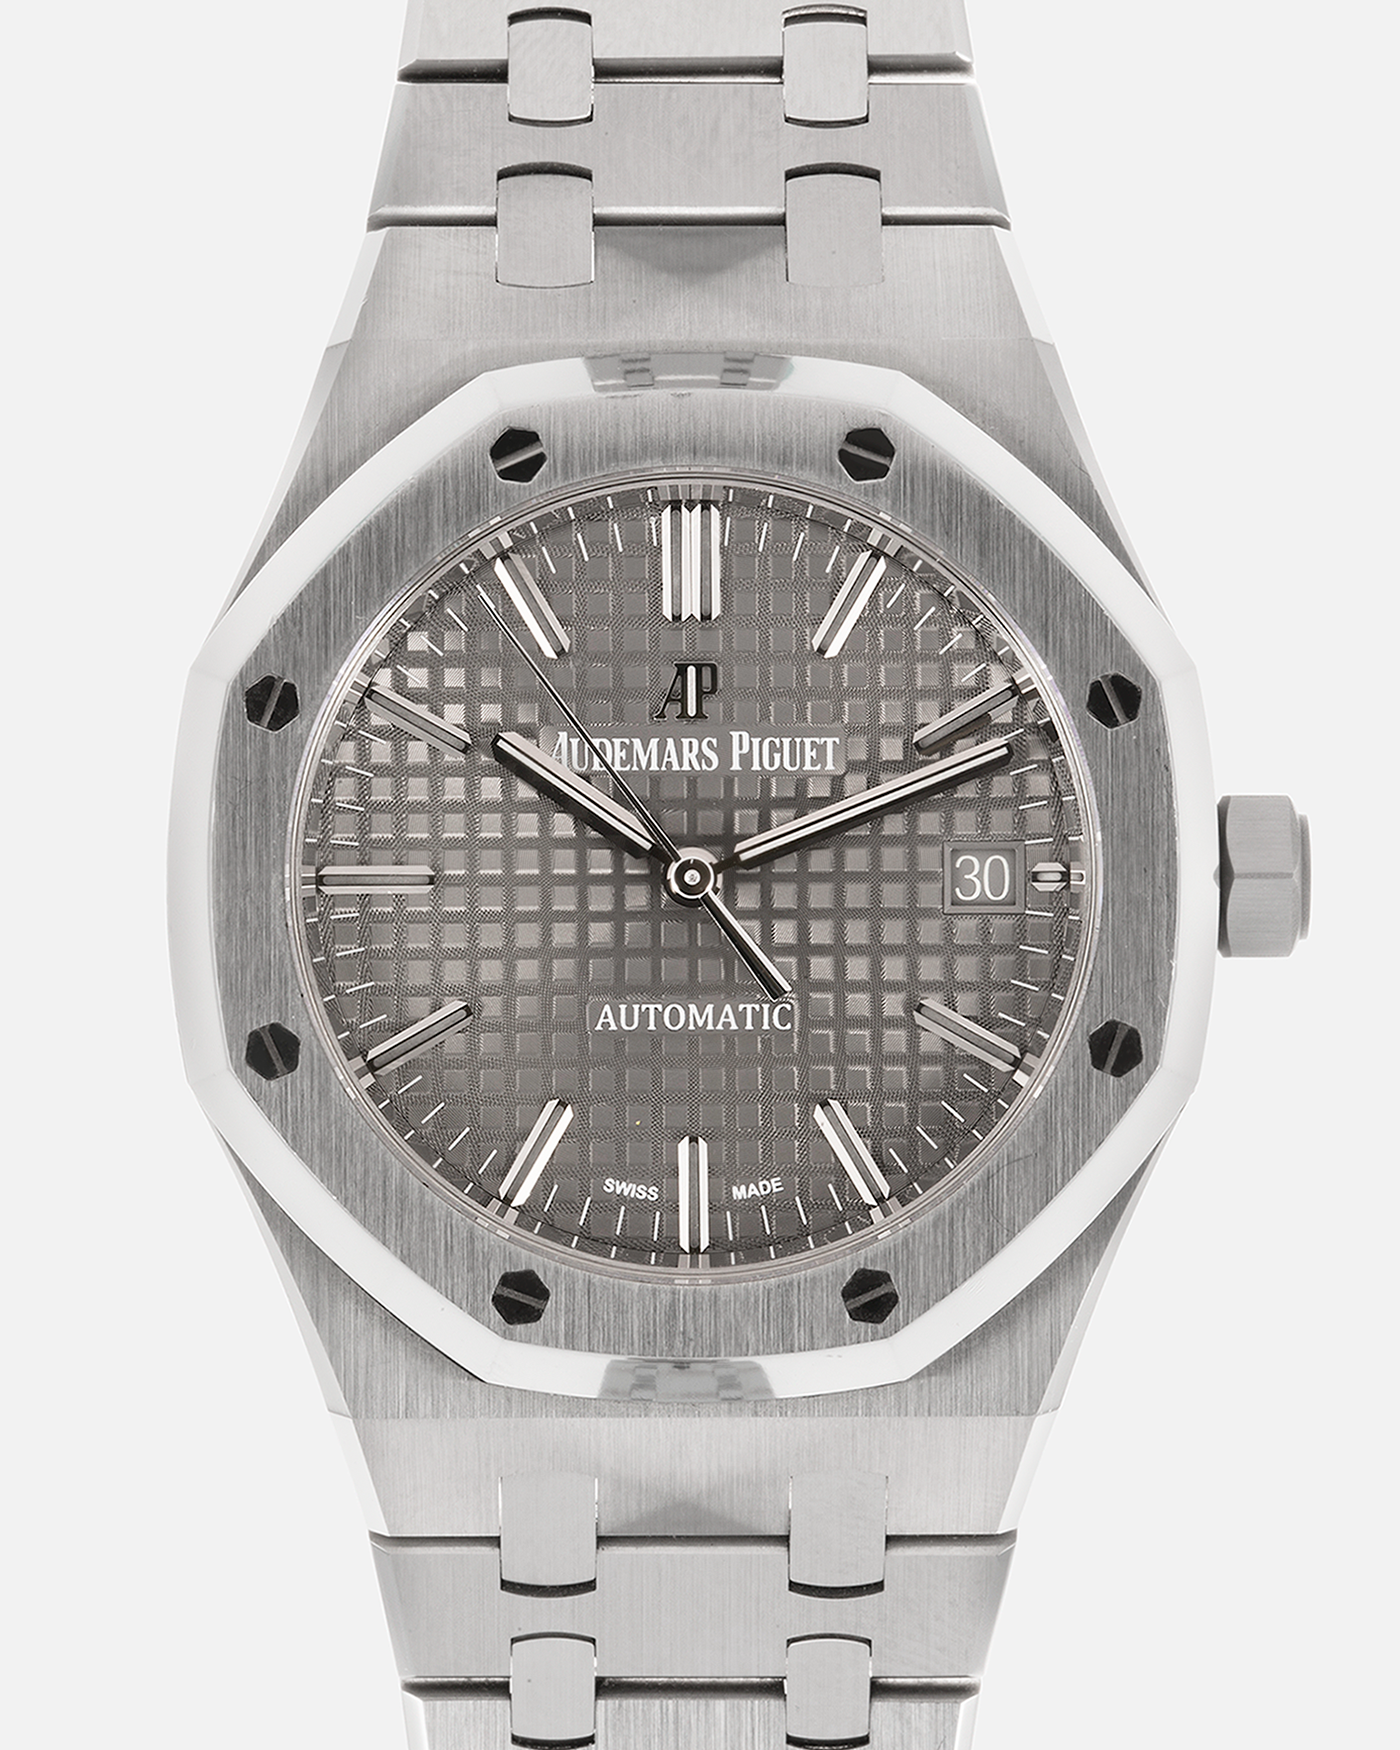 Brand: Audemars Piguet Year: 2020 Model: Royal Oak Reference Number: 15450ST Material: Stainless Steel Movement: Cal. 3120, Self-Winding Case Diameter: 37mm Bracelet: Audemars Piguet Stainless Steel Integrated Bracelet with Signed Clasp